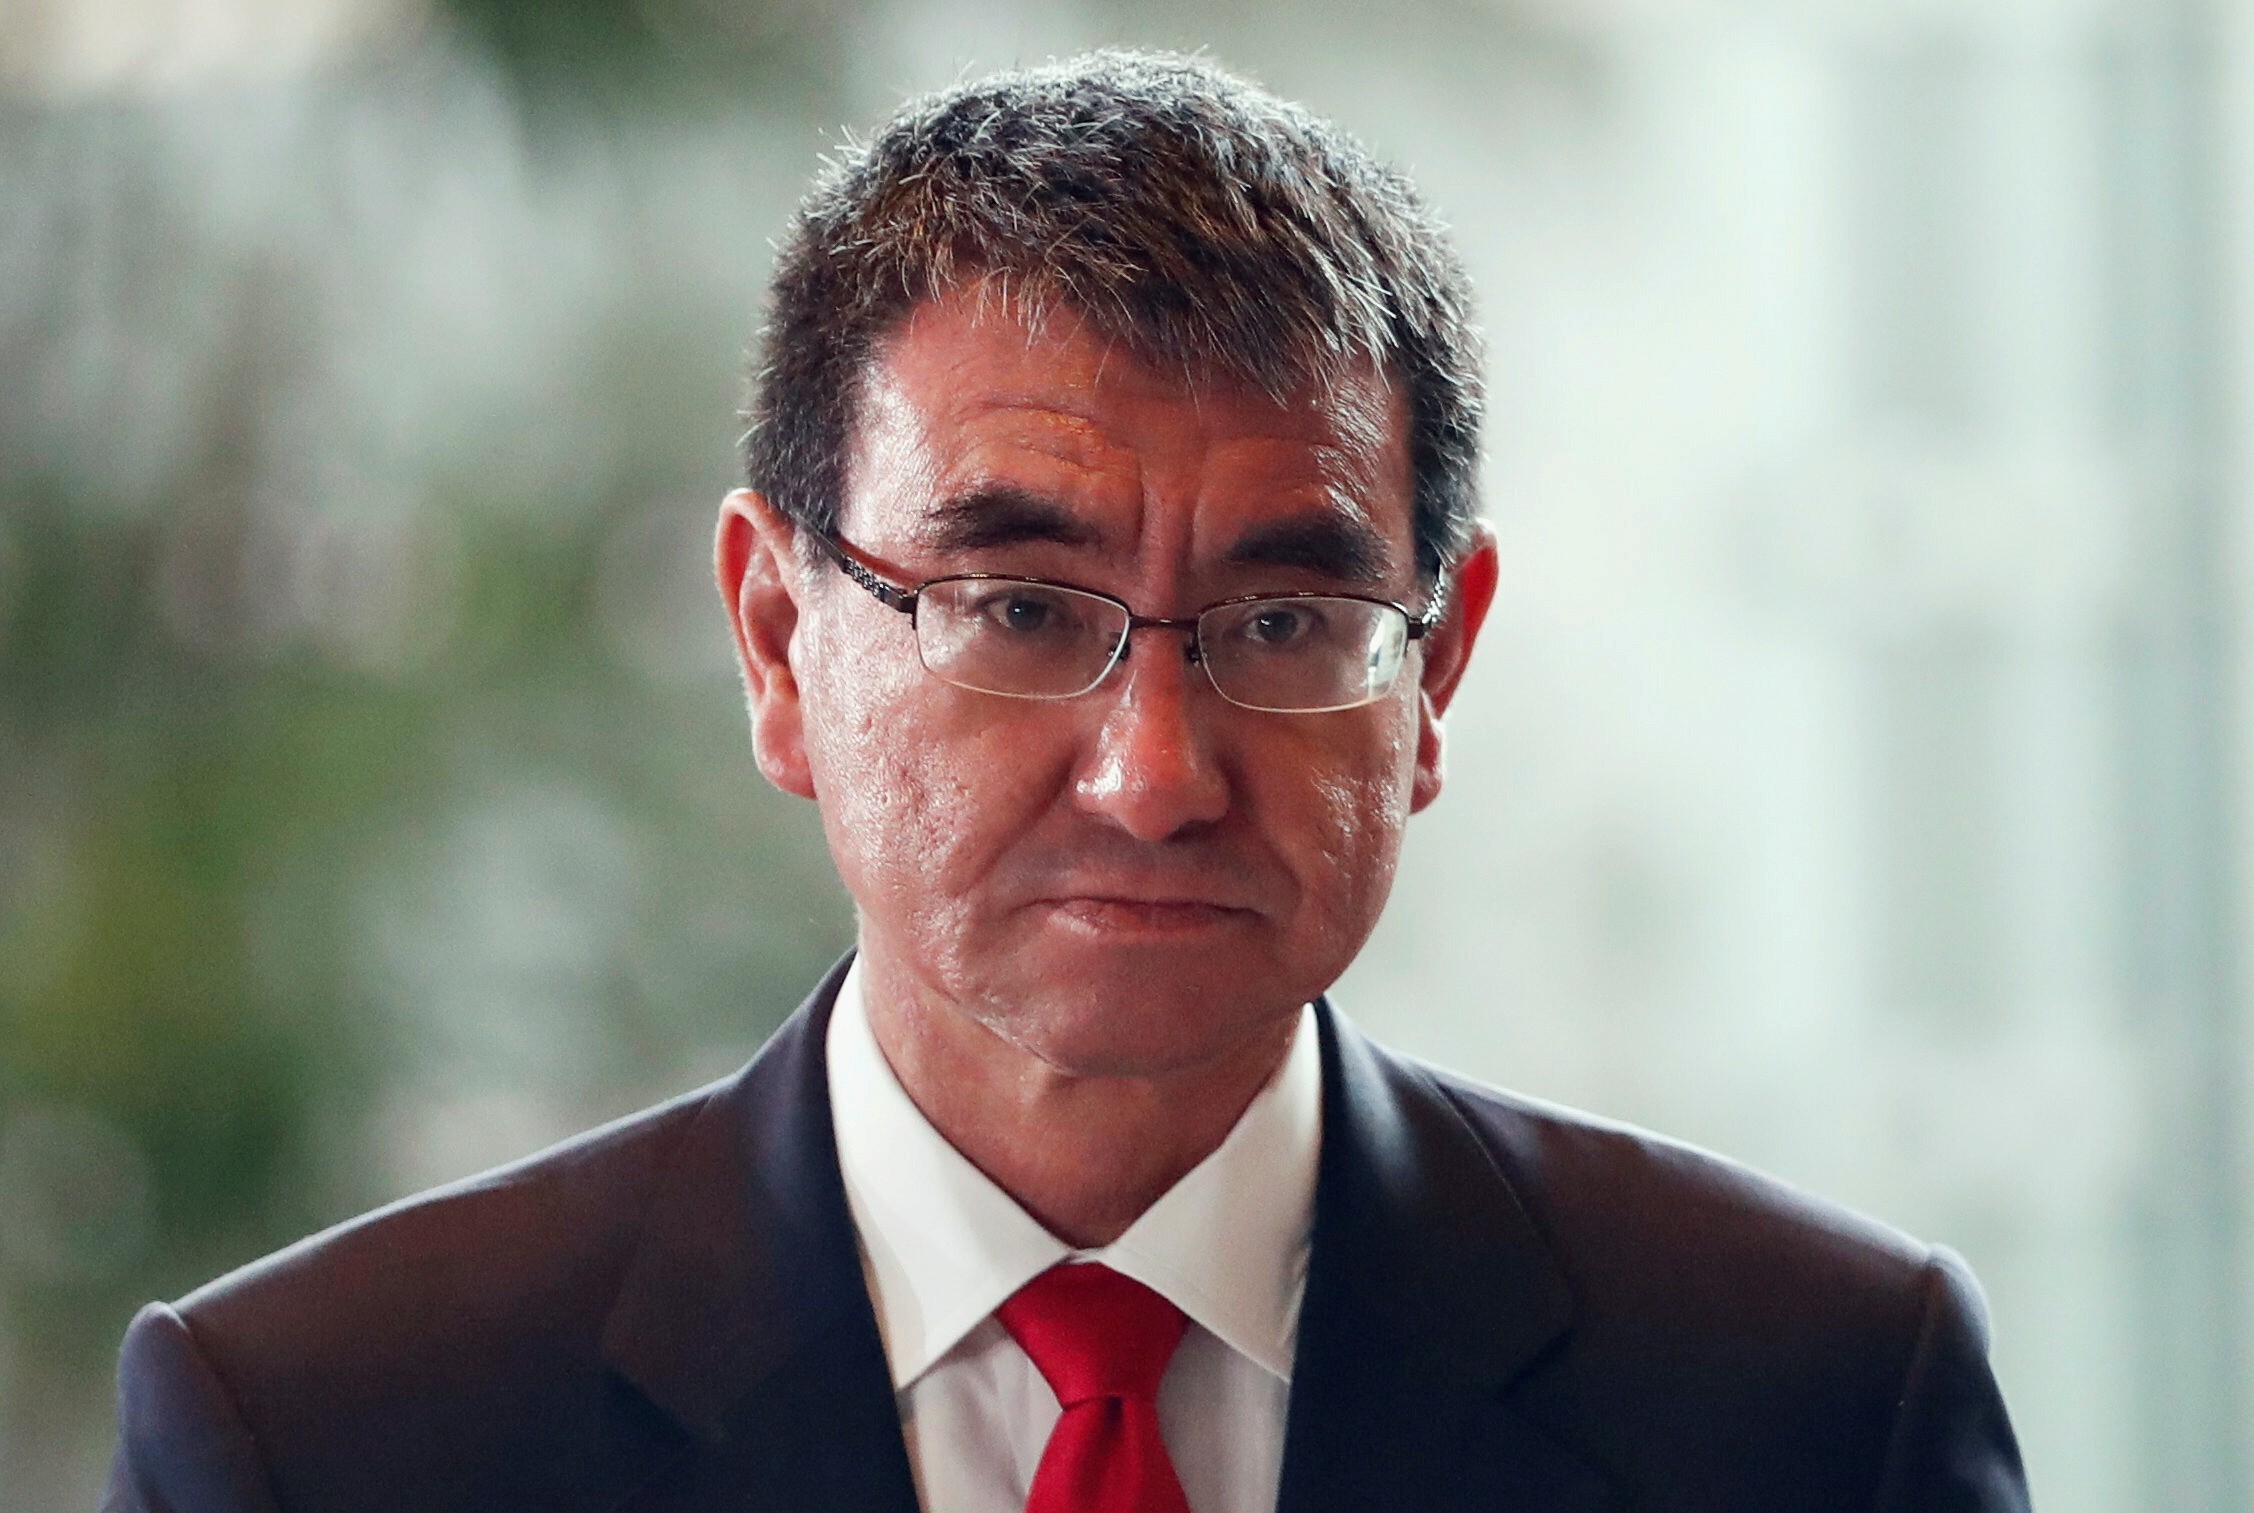 Taro Kono has emerged as the front runner to replace Japanese Prime Minister Yoshihide Suga. Photo: Reuters